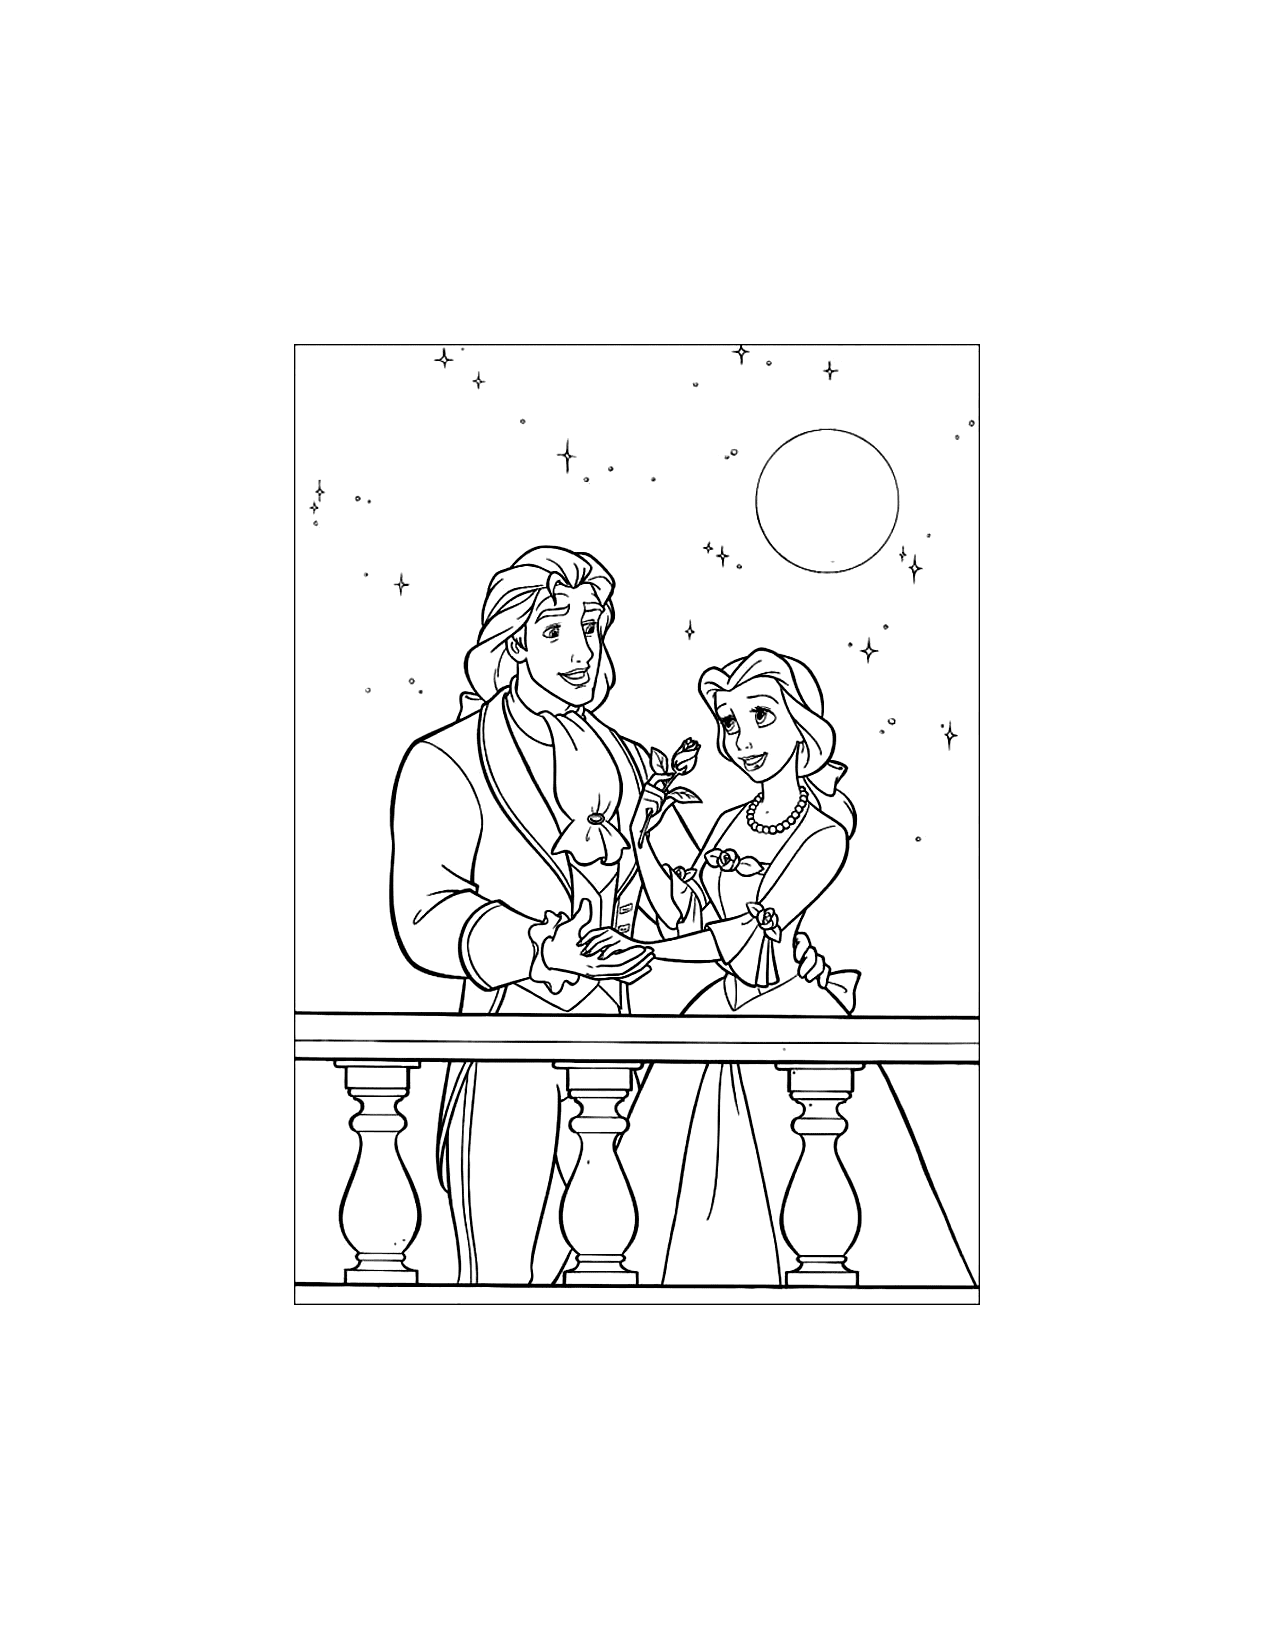 Prince Adam And Belle Coloring Page